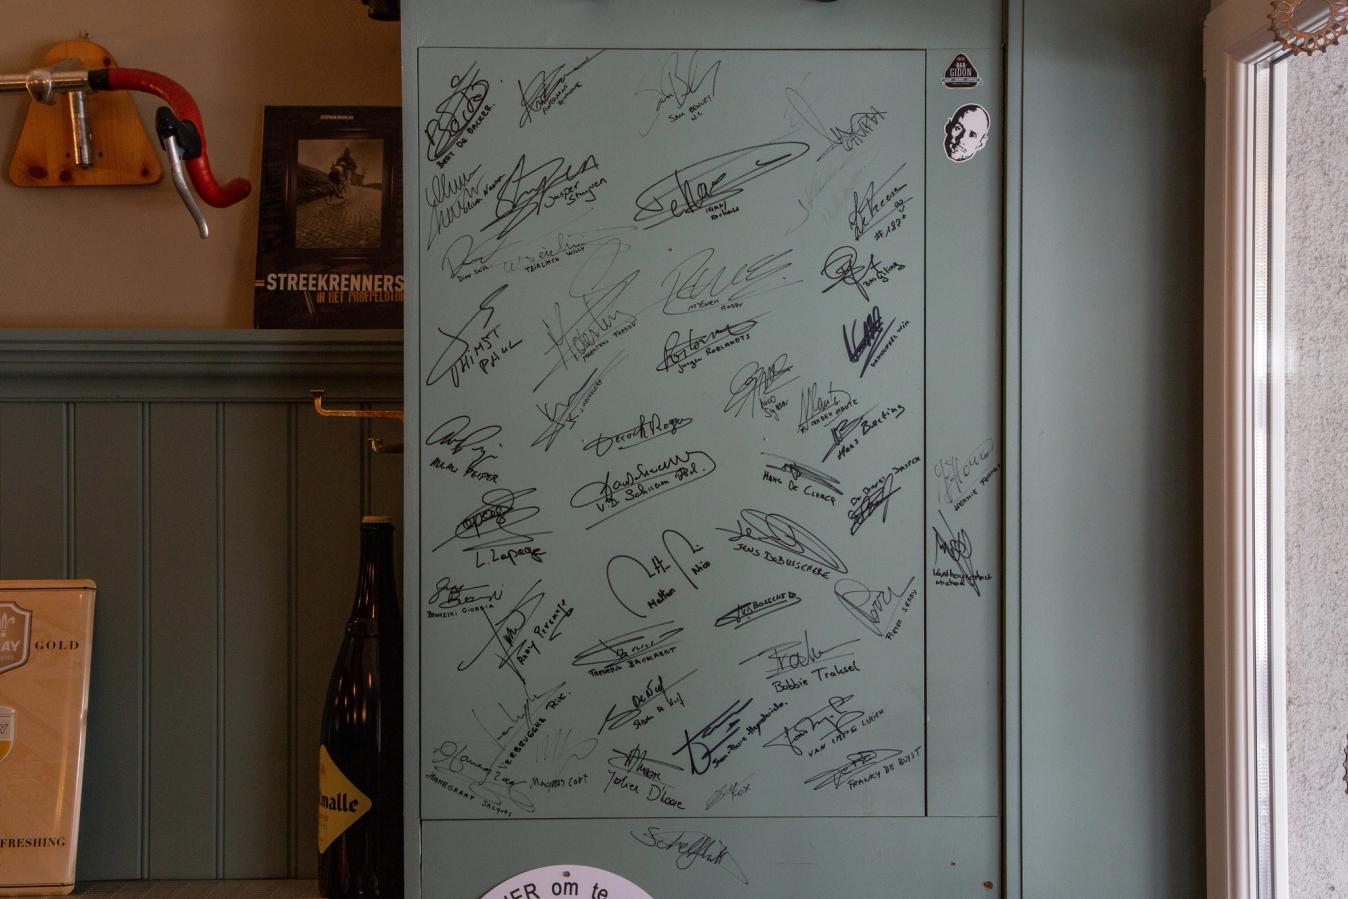 Signatures from pro cyclist visitors cover the walls and tables